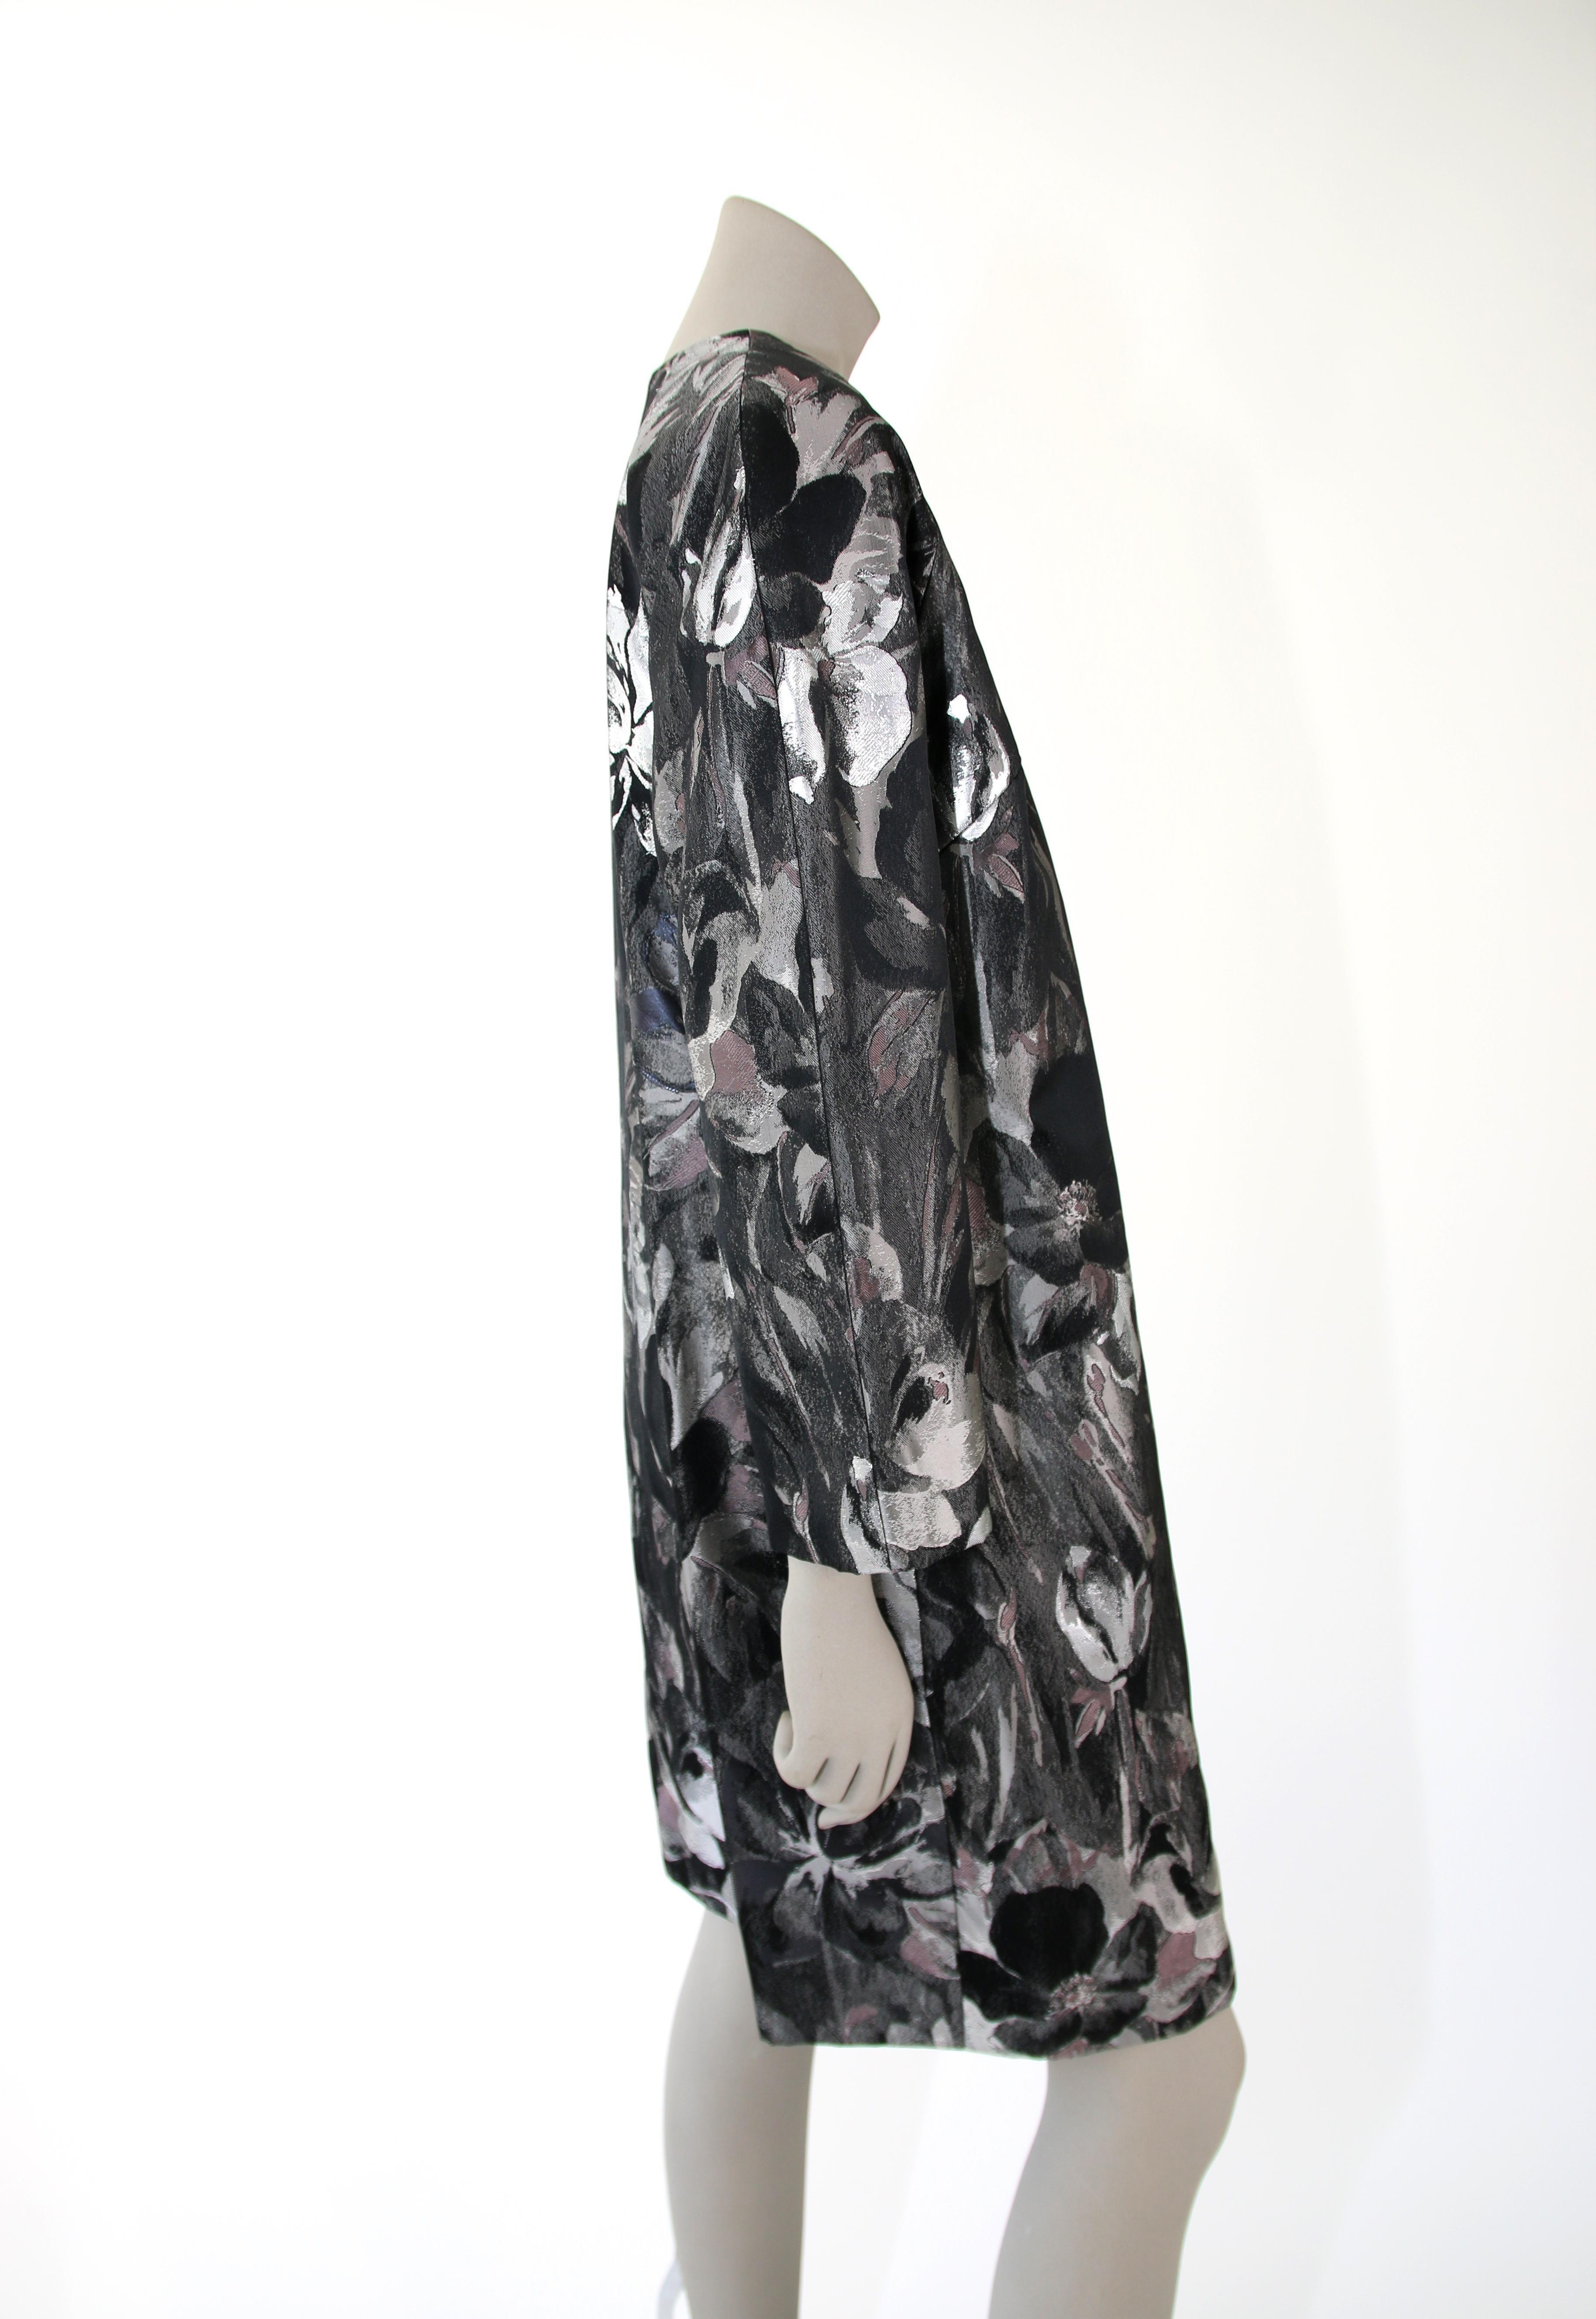 Pelush Black and Silver Brocade Printed Flower Coat - XS For Sale 5